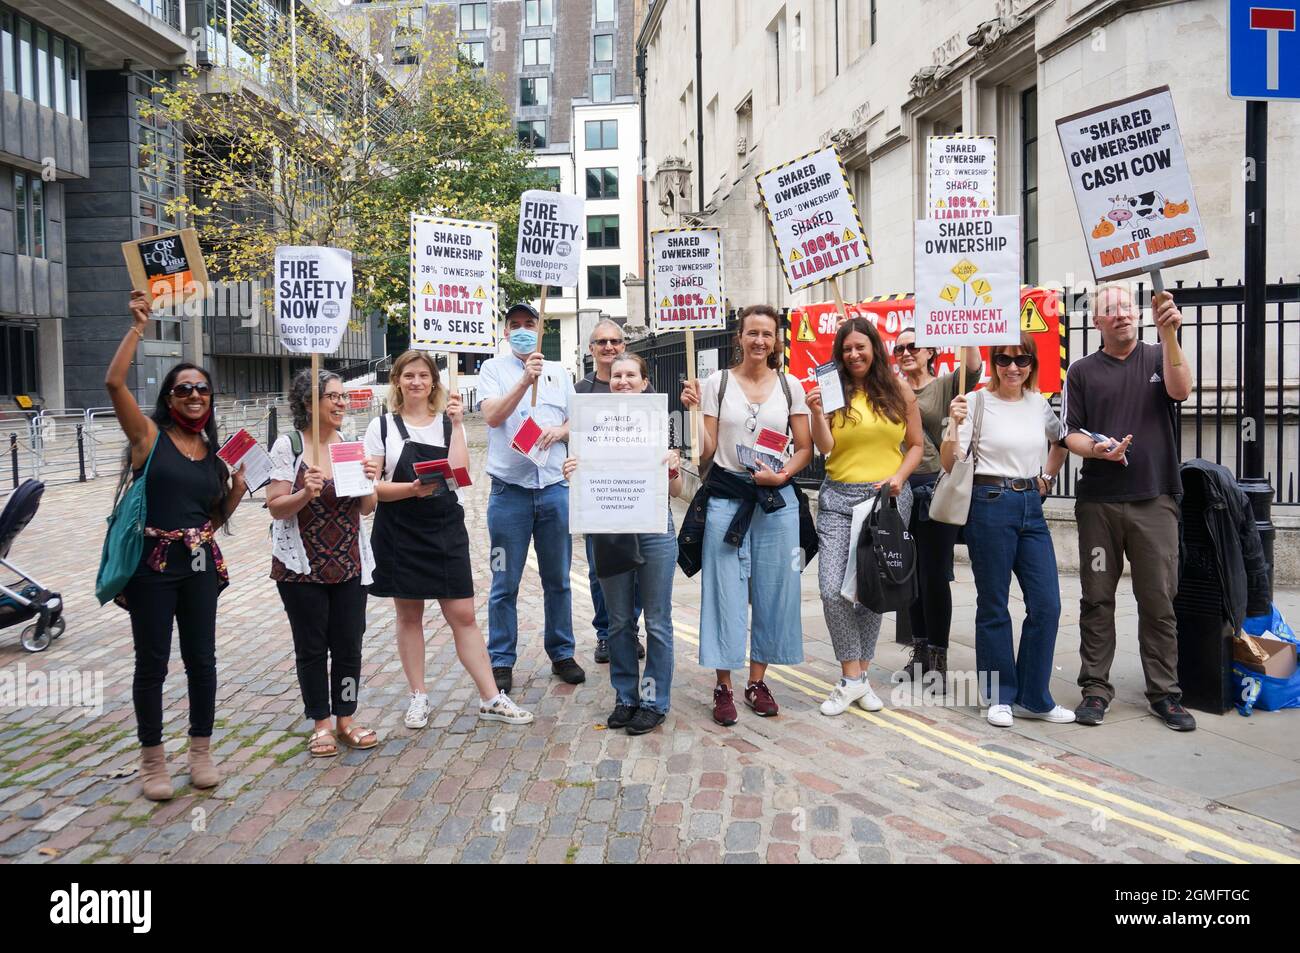 Rent council is a wiser choice dont buy Shared Ownership or Leaseholder is a hung, you become a slave to your property you dont owns demonstration at Queen Elizabeth II Conference Centre on  2021-09-18, London, UK. Stock Photo